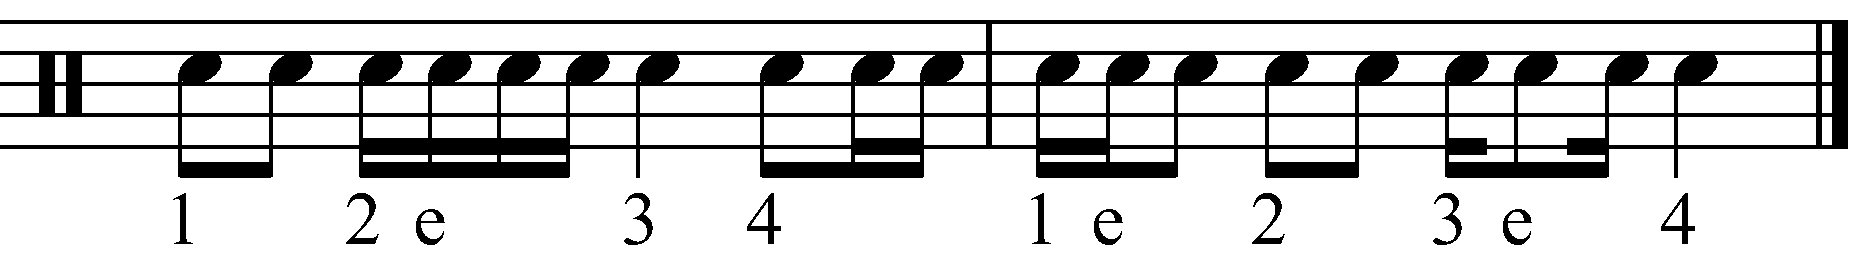 An example snare drum rhythm with added 'e' counts.